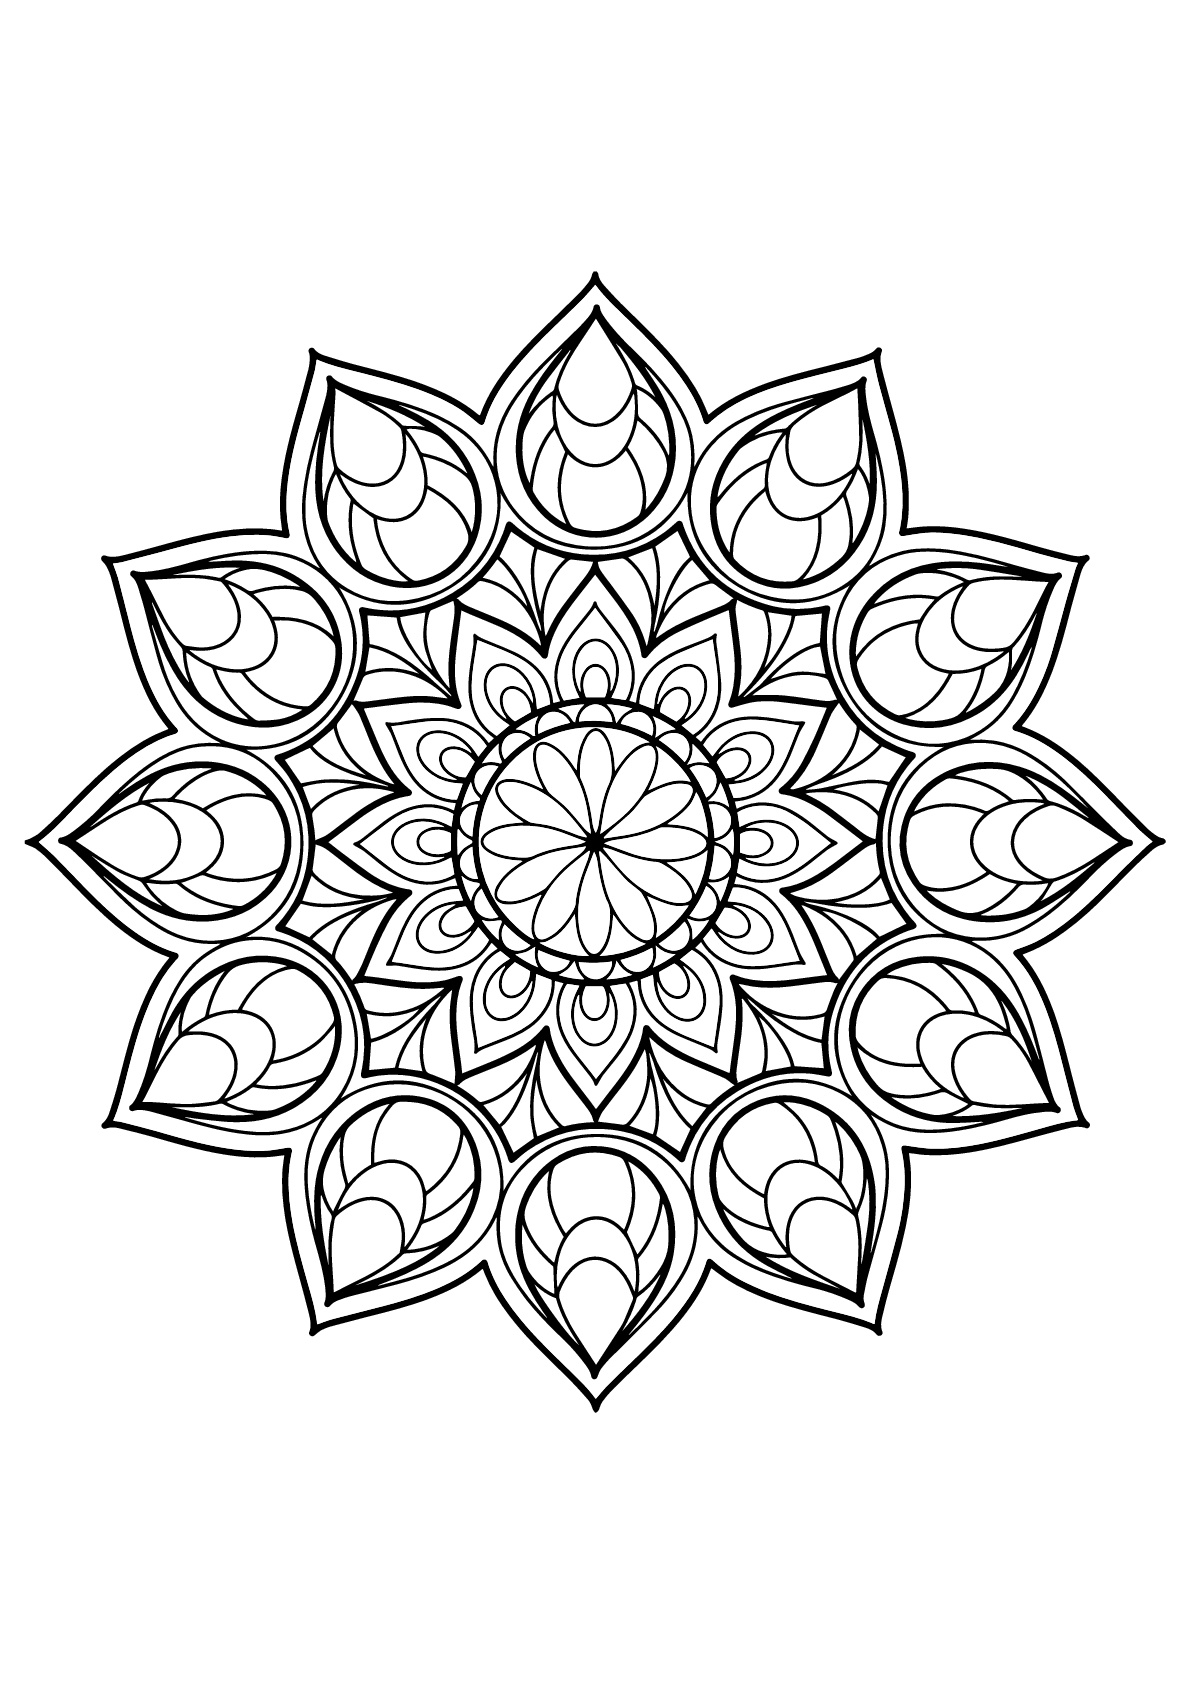 Mandala from free coloring books for adults 9 - Mandalas Adult Coloring  Pages